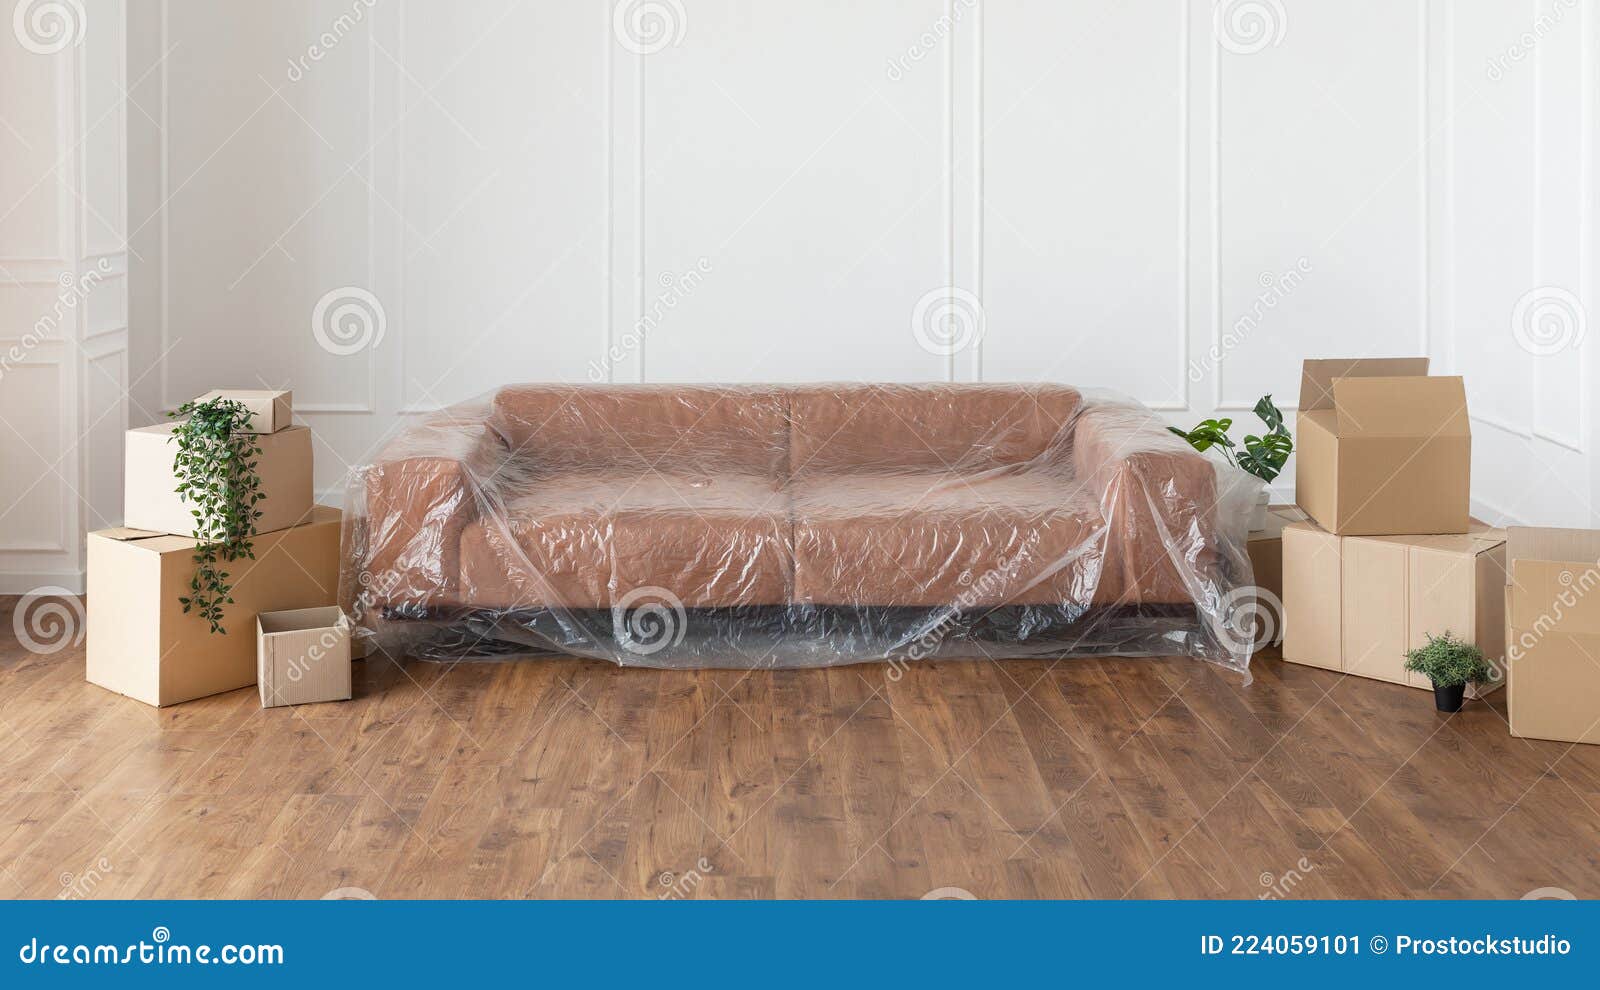 White Dust Cover Cloth Covering Furnitures Stock Photo 1111368134